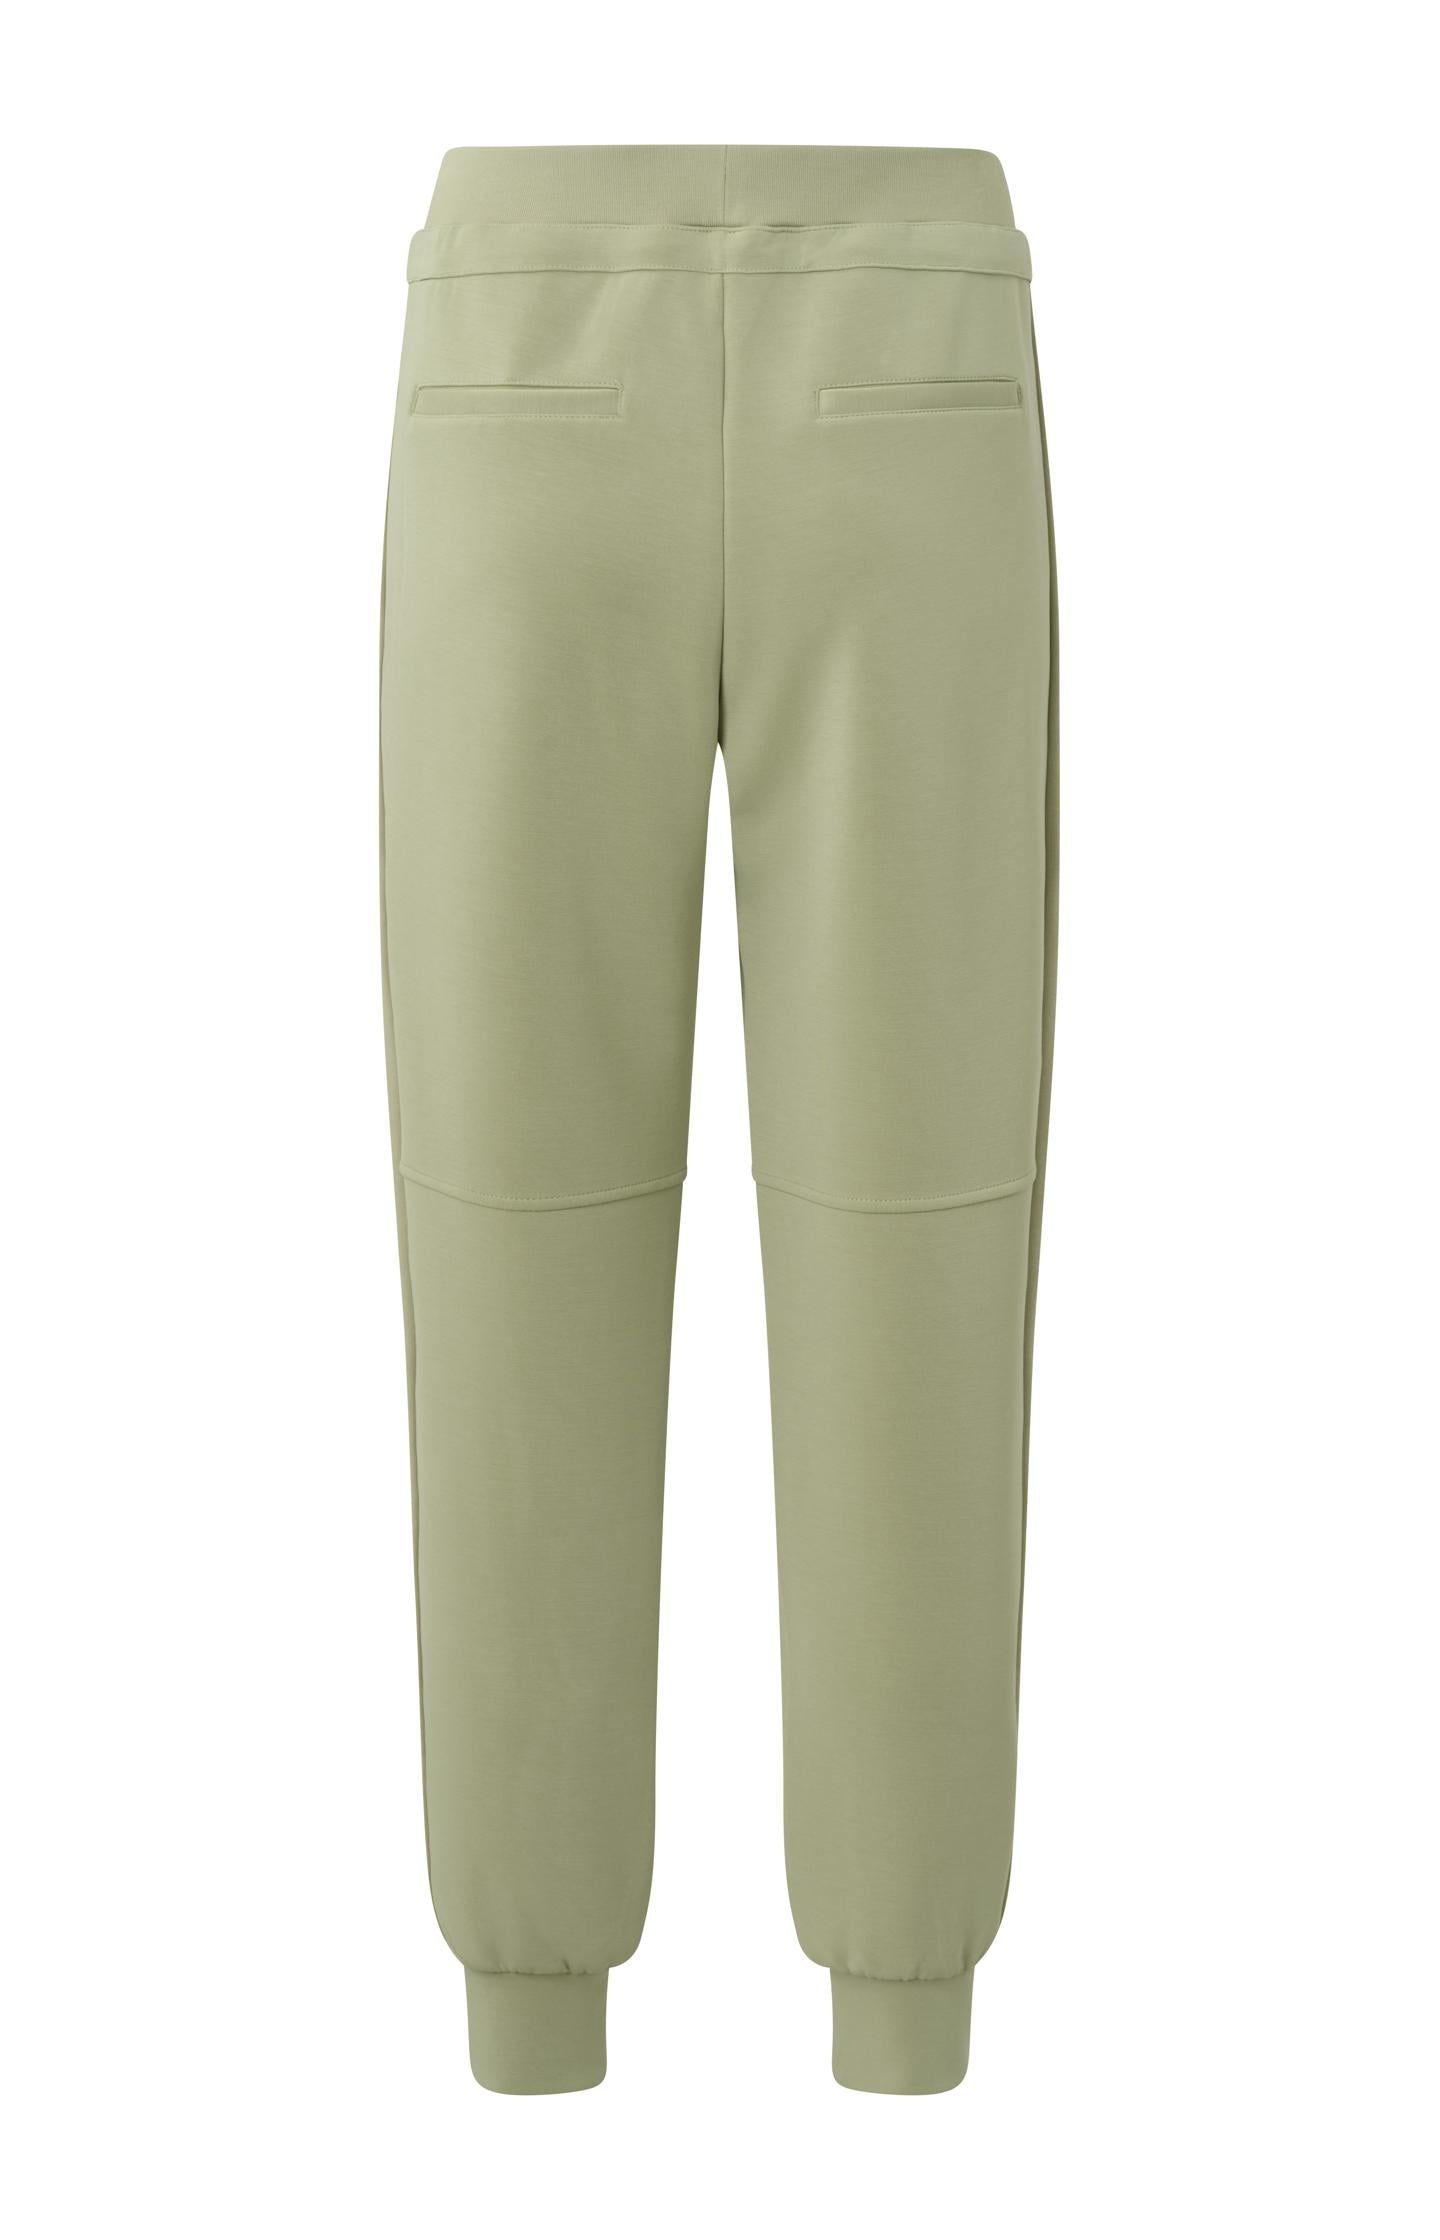 Scuba jogging trousers with pockets and elastic waist